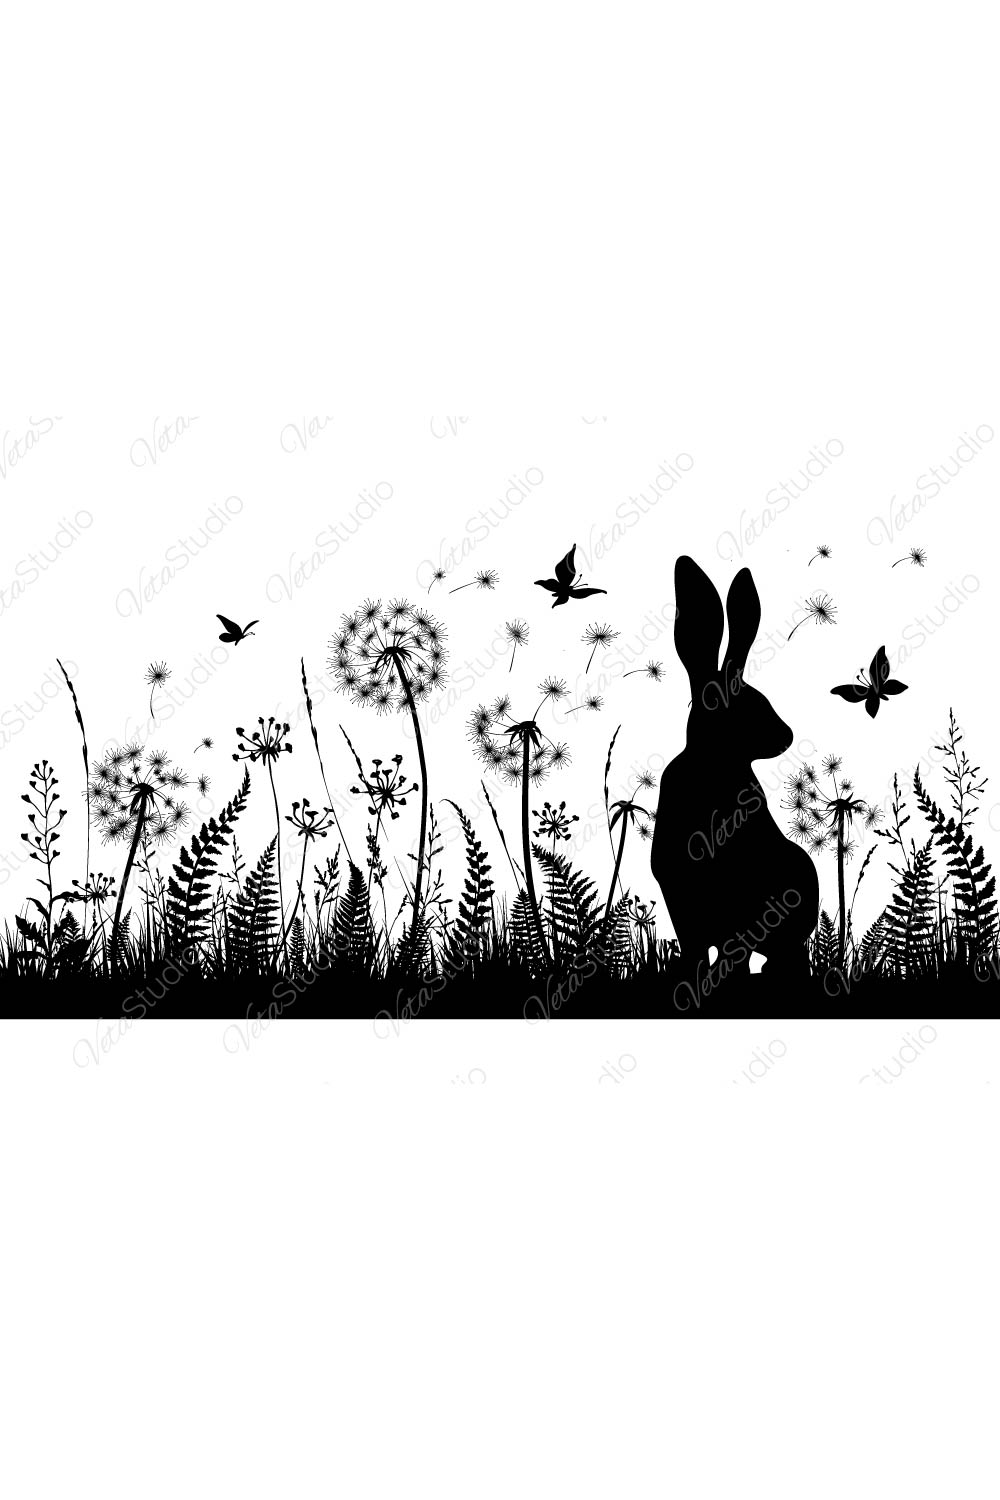 Floral Background With Rabbit And Dandelions pinterest image.